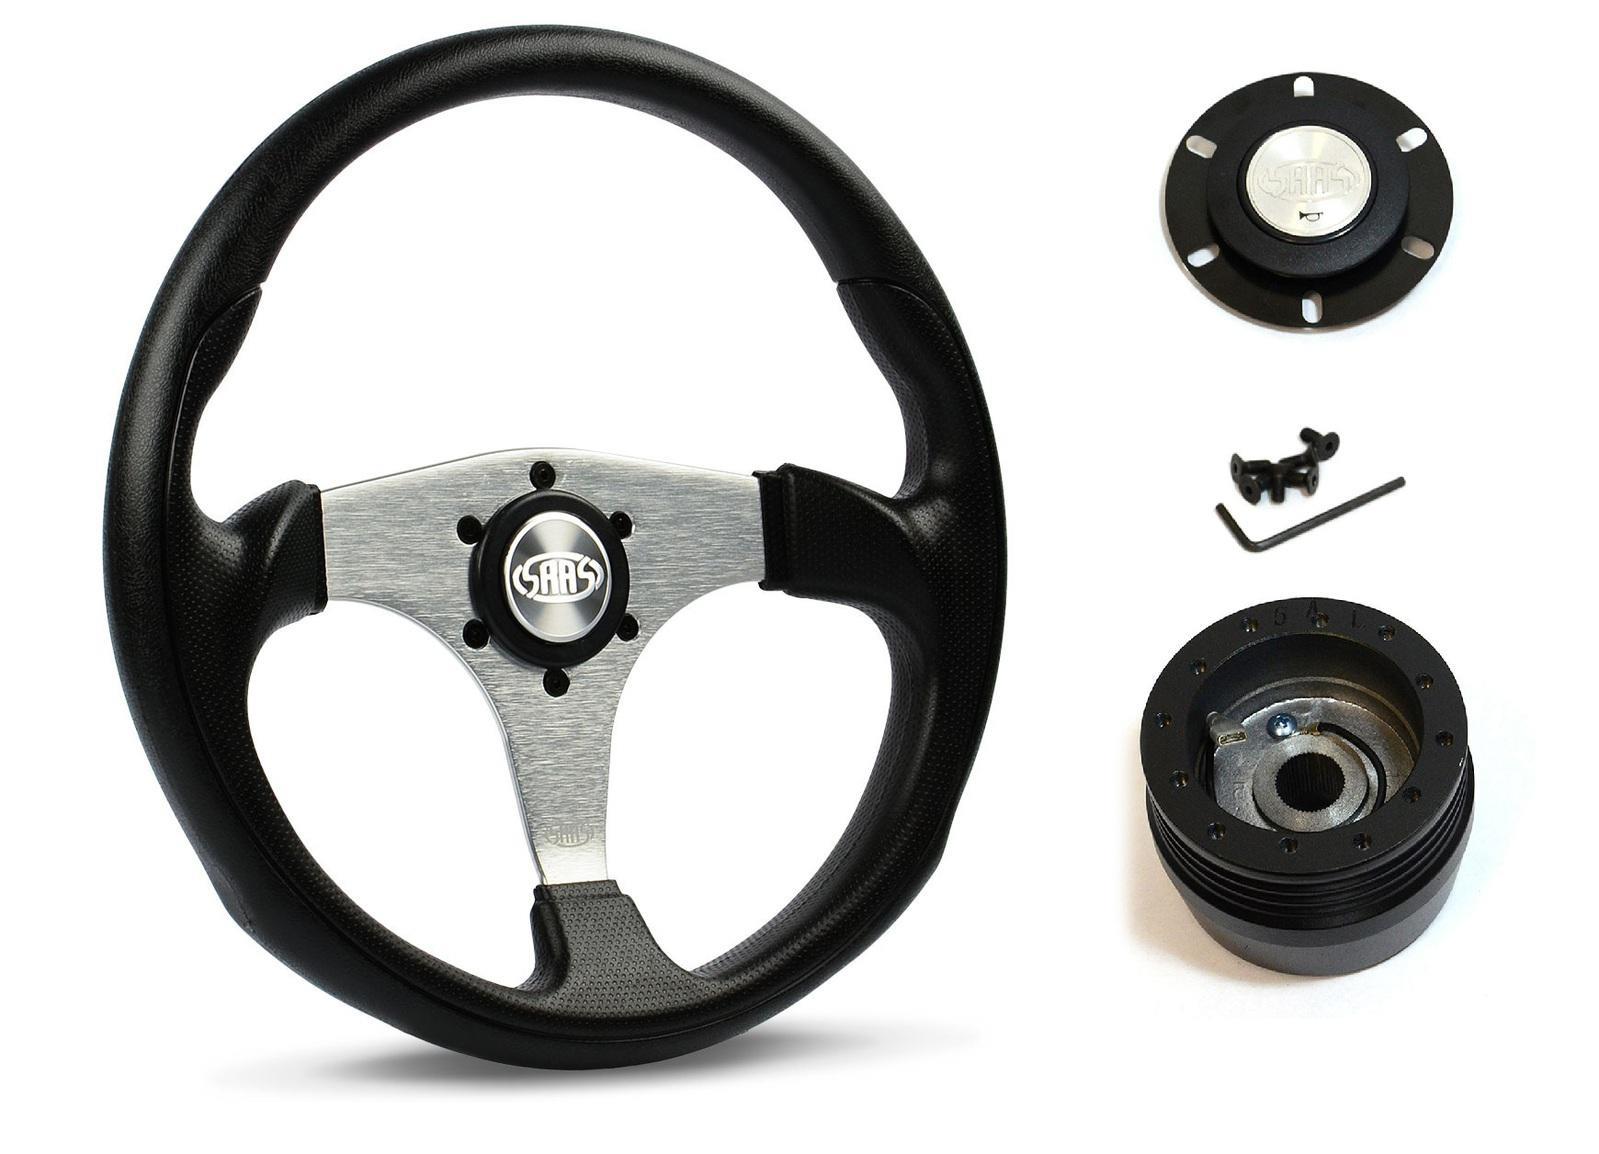 SAAS Steering Wheel Poly 14" ADR Octane Brushed Alloy Spoke SW515S-R and SAAS boss kit for Nissan Silvia S14 1993-1996